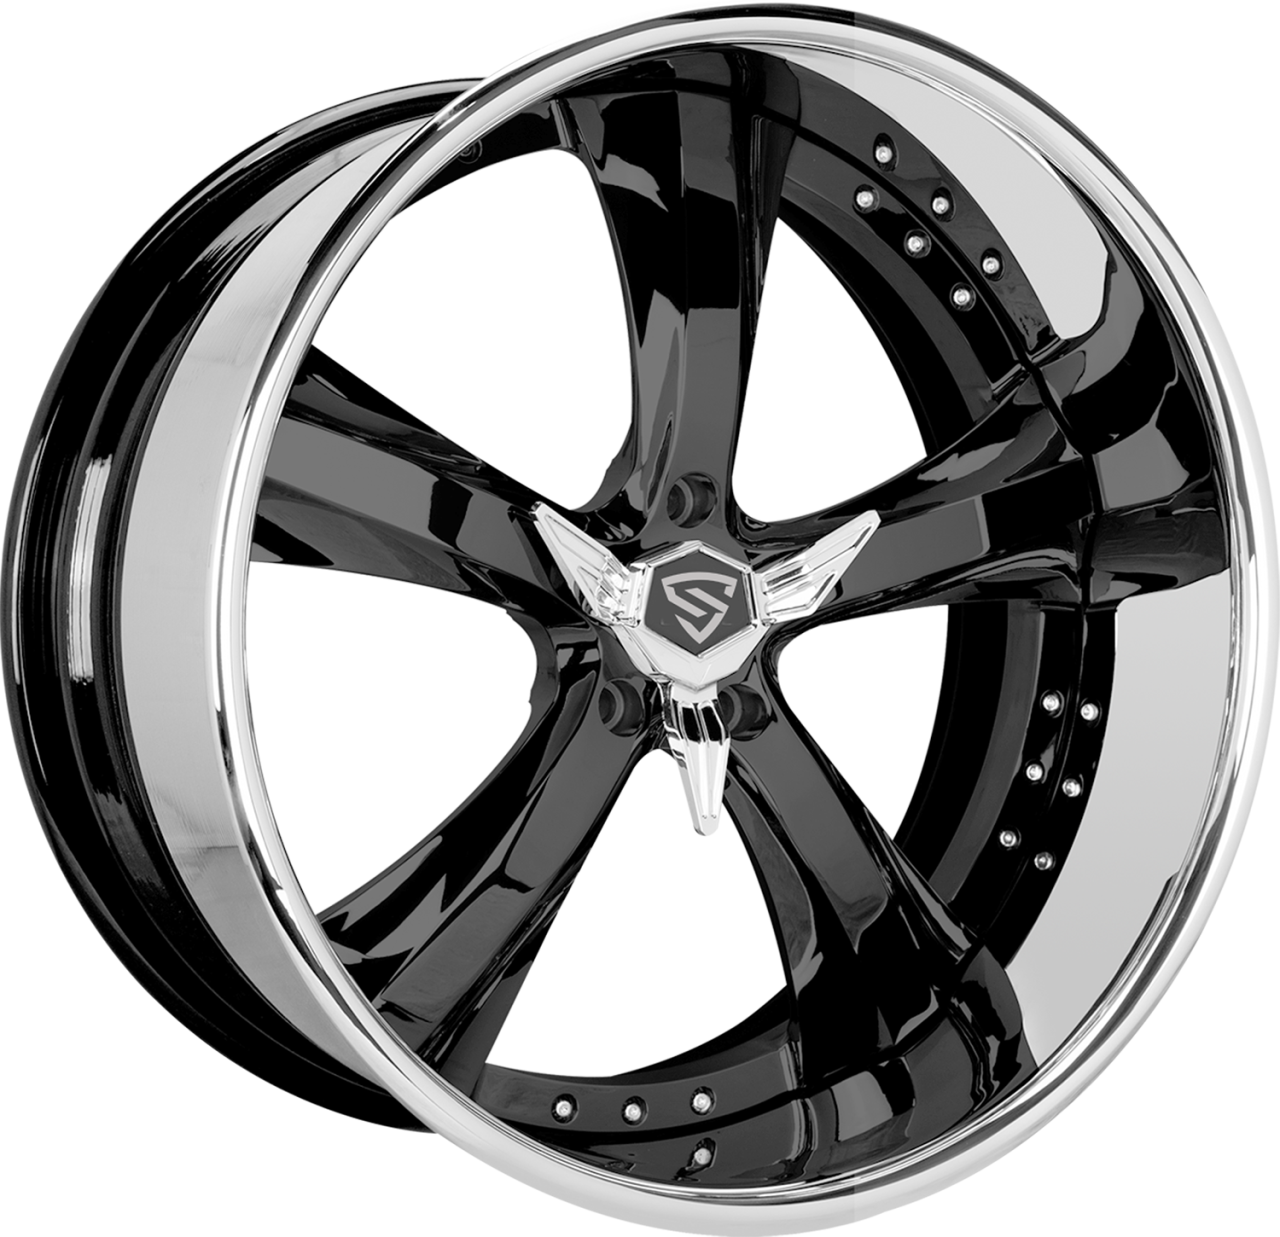 Snyper Forged Mach-5 Black and Chrome wheel with Mach-5 Black and Chrome finish